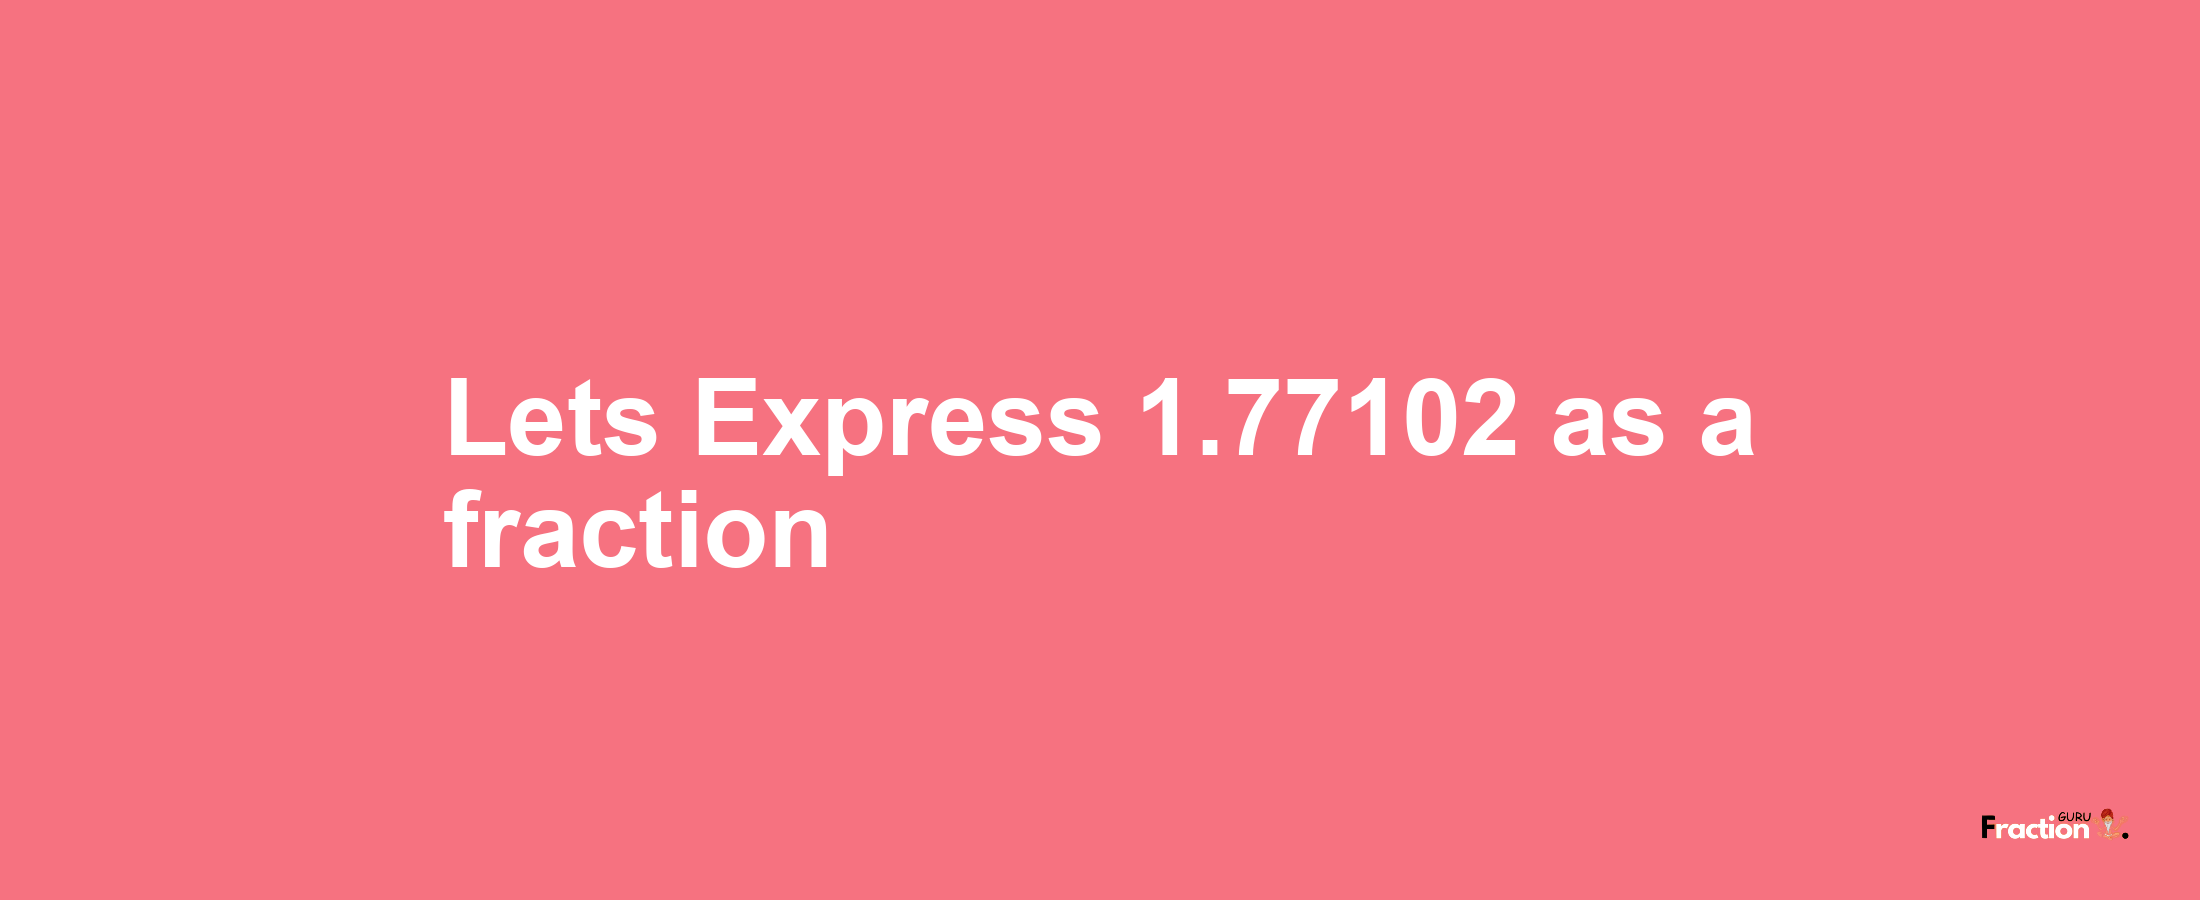 Lets Express 1.77102 as afraction